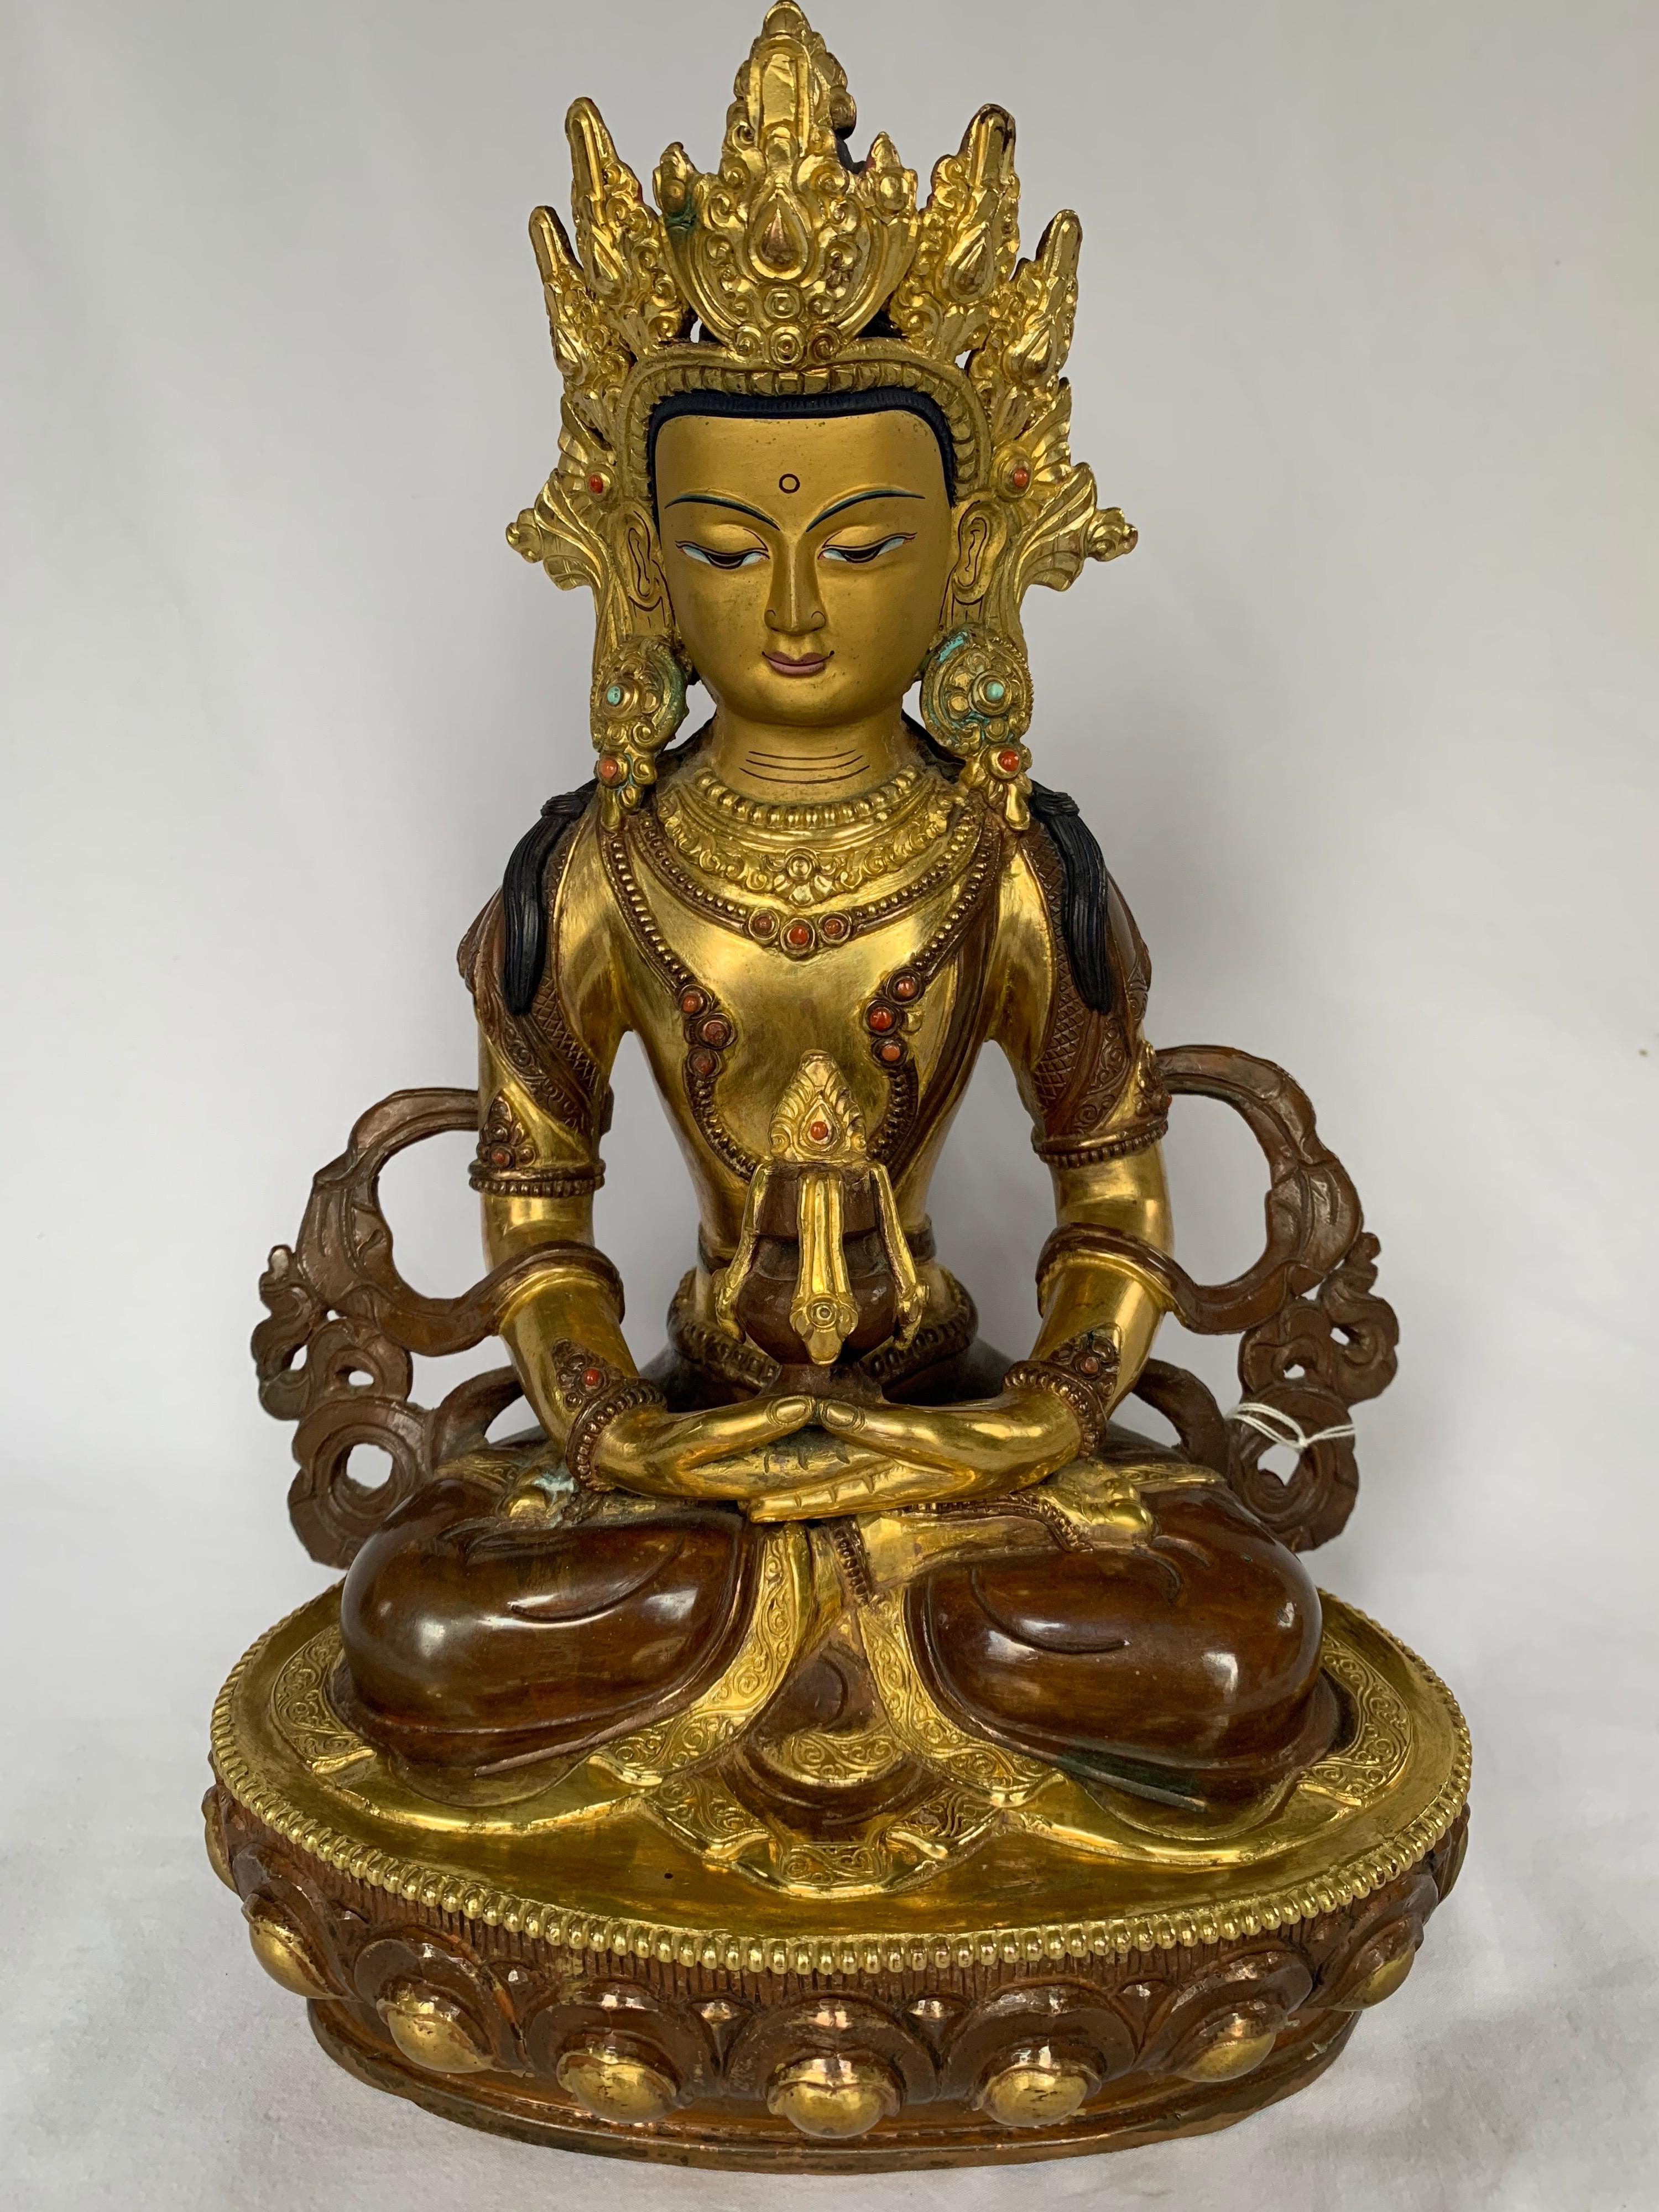 Unknown Figurative Sculpture - Aparmita Statue 12 Inch with 24K Gold Handcrafted by Lost Wax Process